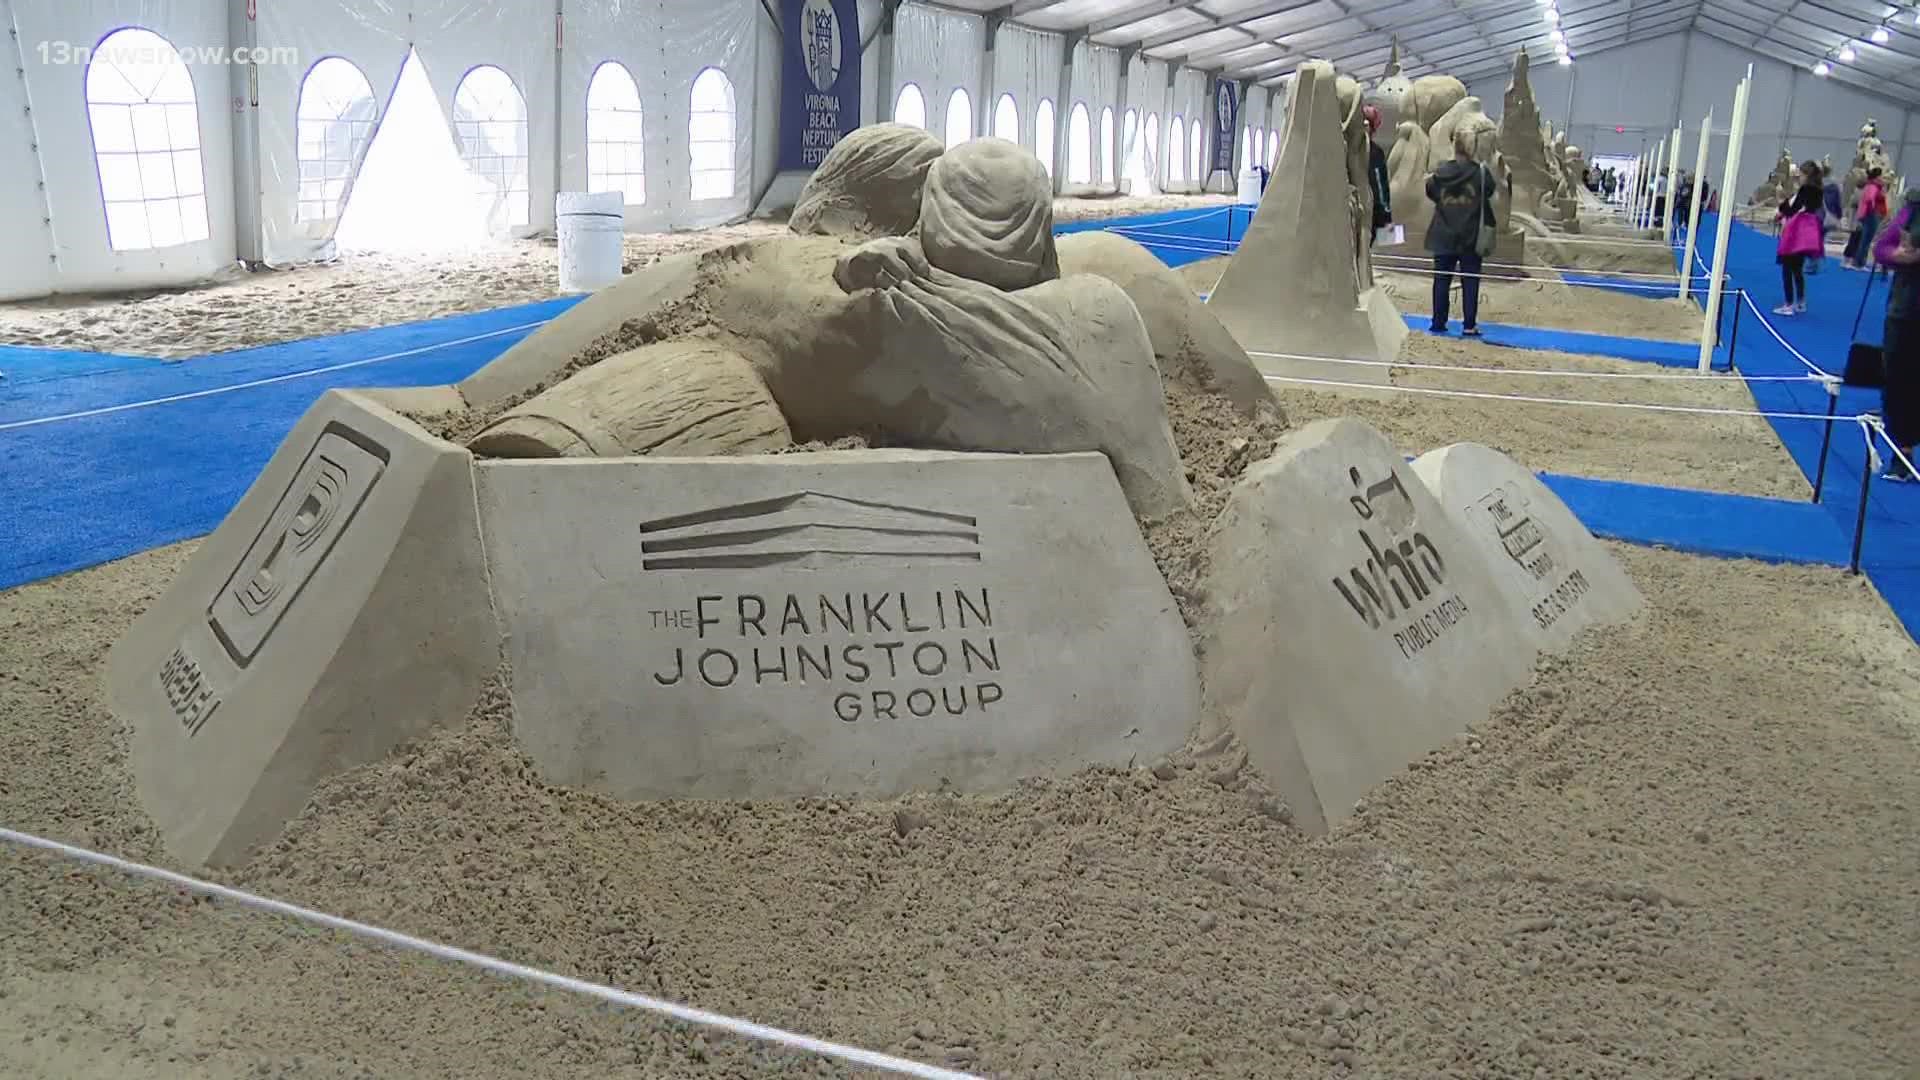 Despite postponement due to weather, the sand sculpting competition is off to a great start! This year's exhibit features 31 artists from 11 different countries.